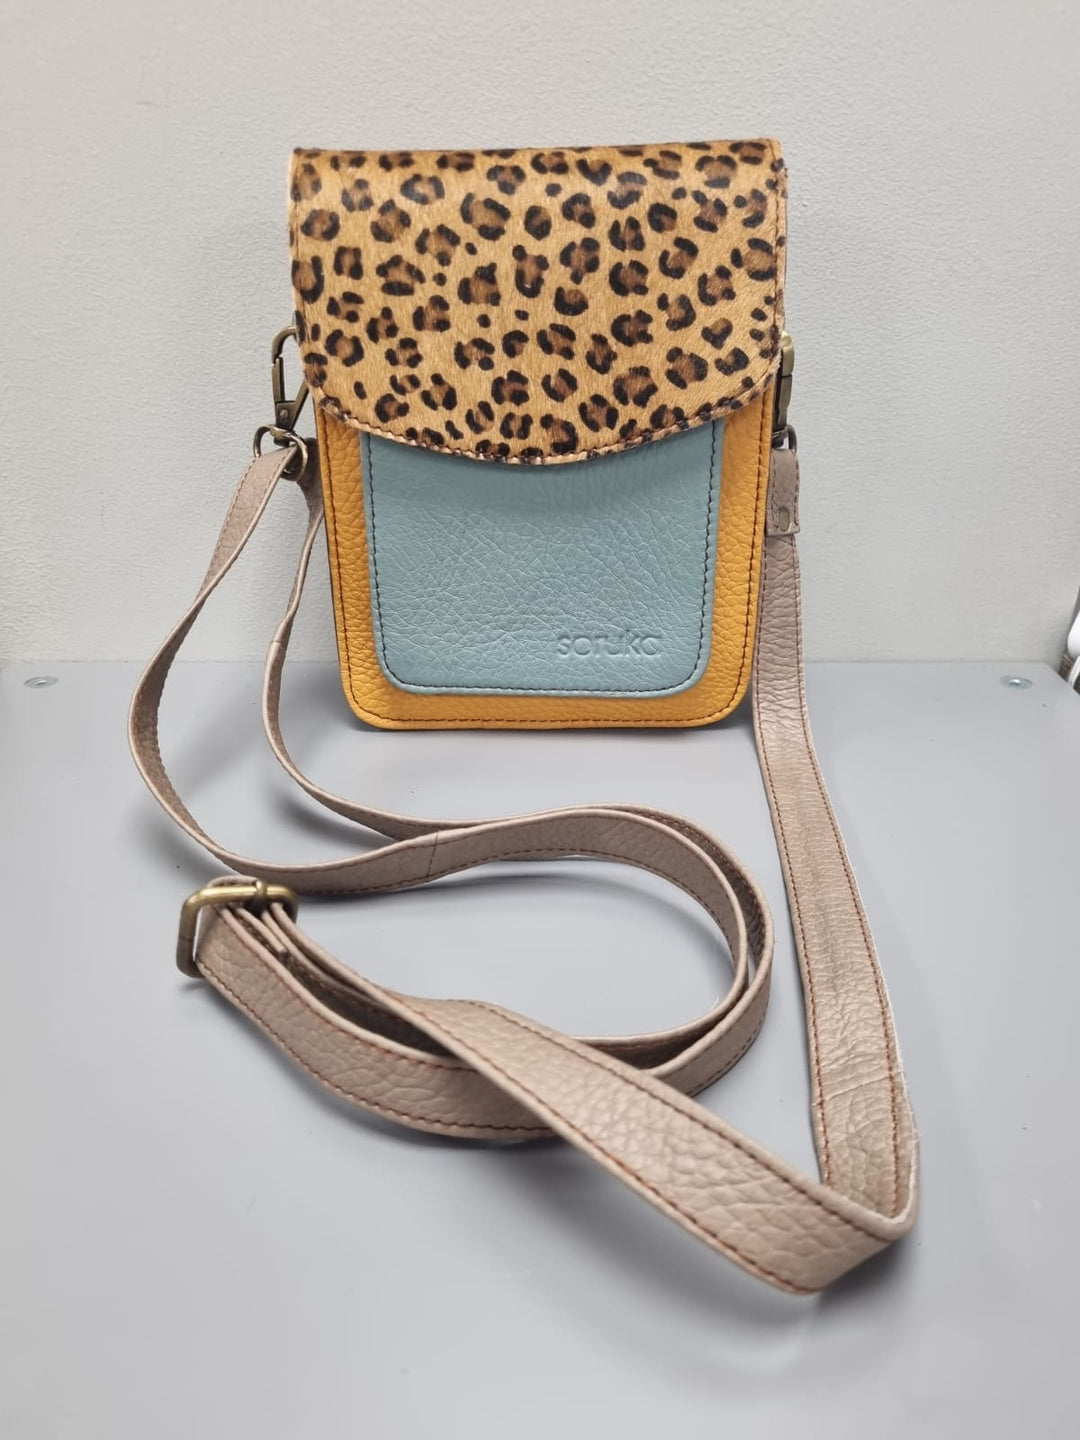 Aiko Leather Cross Body Bag -Mustard and Blue Leather with Animal Print